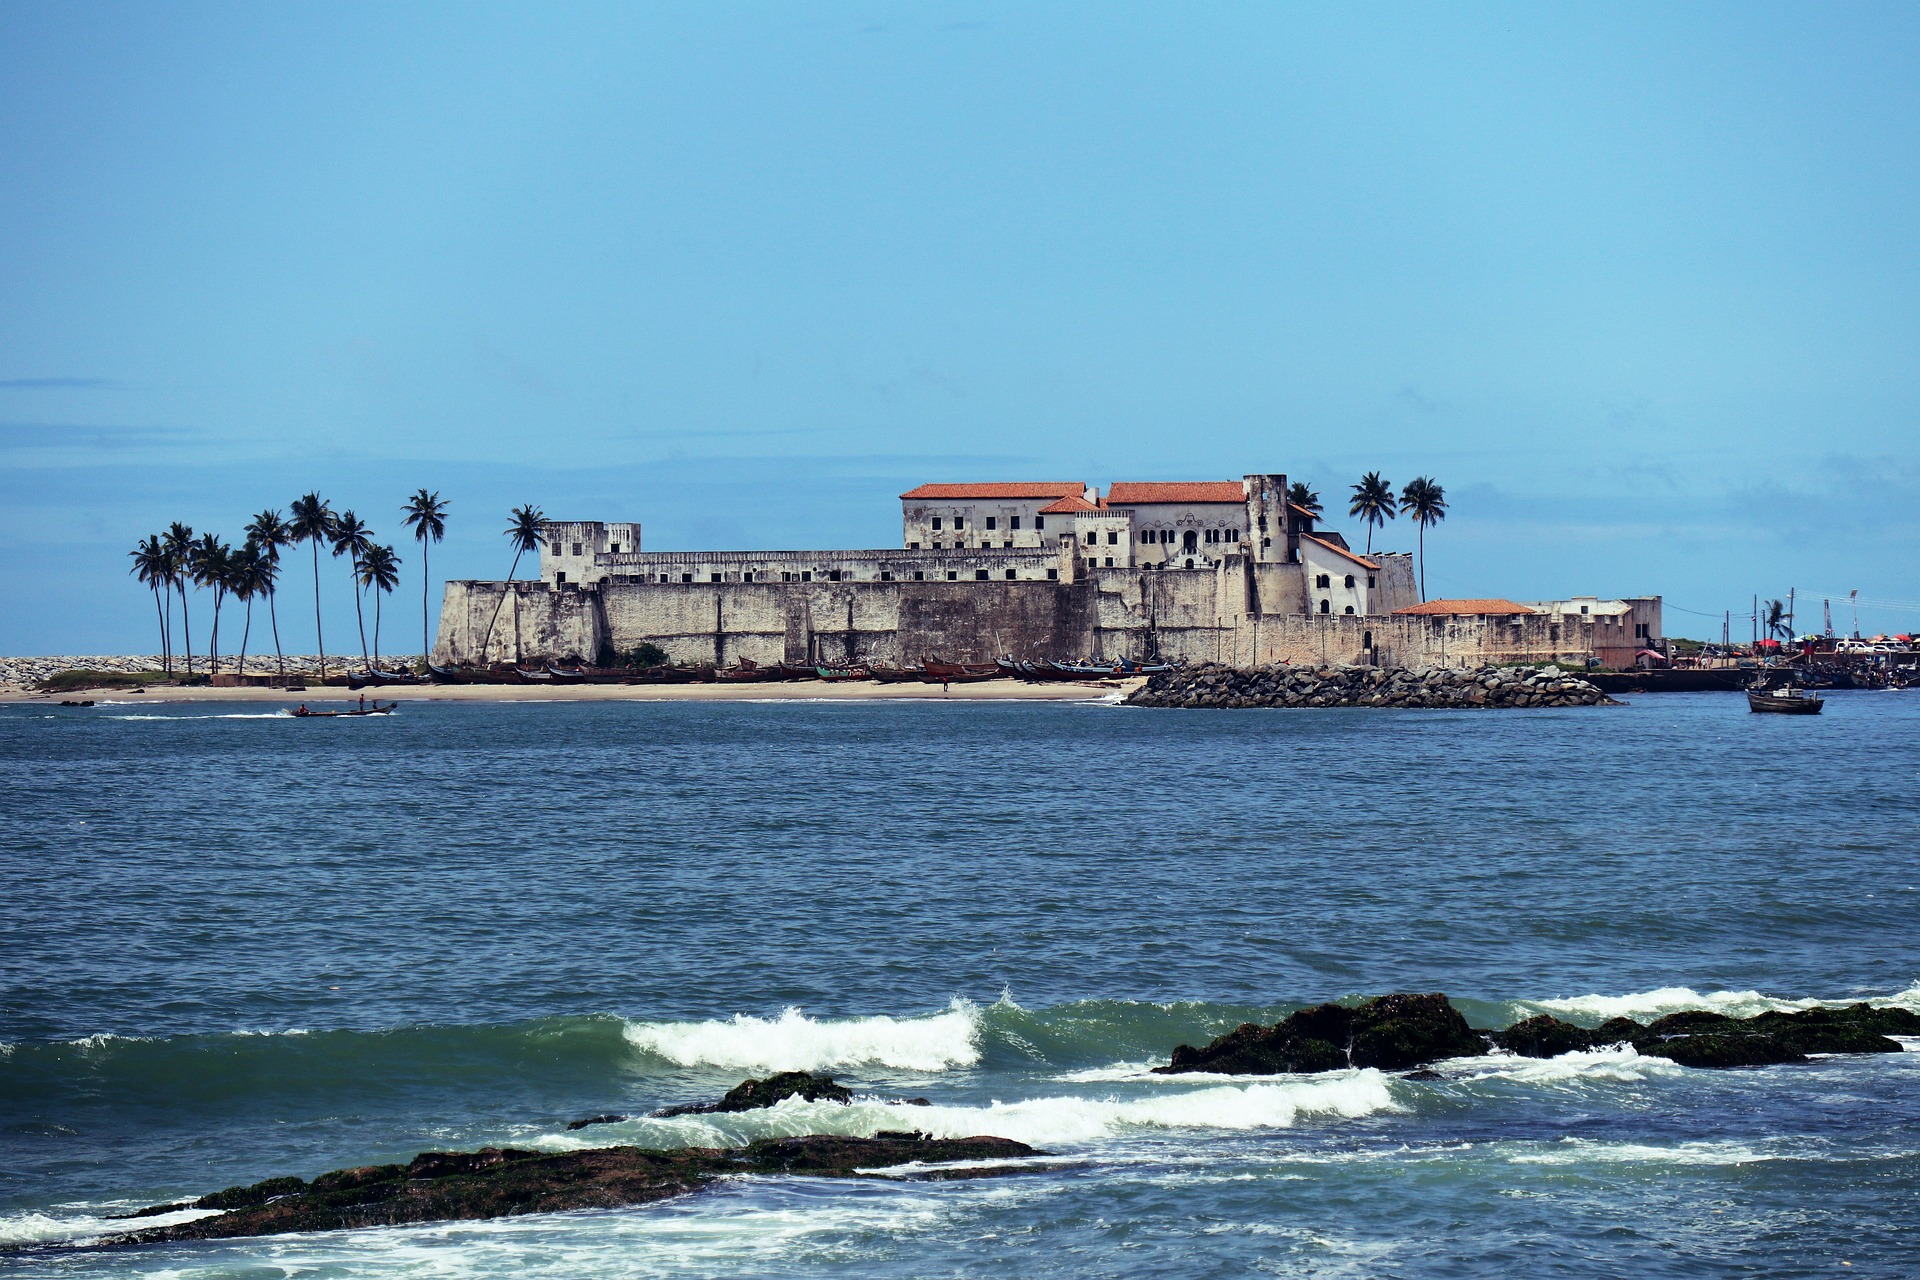 A picture of St. George's castle inAccra, Ghana.